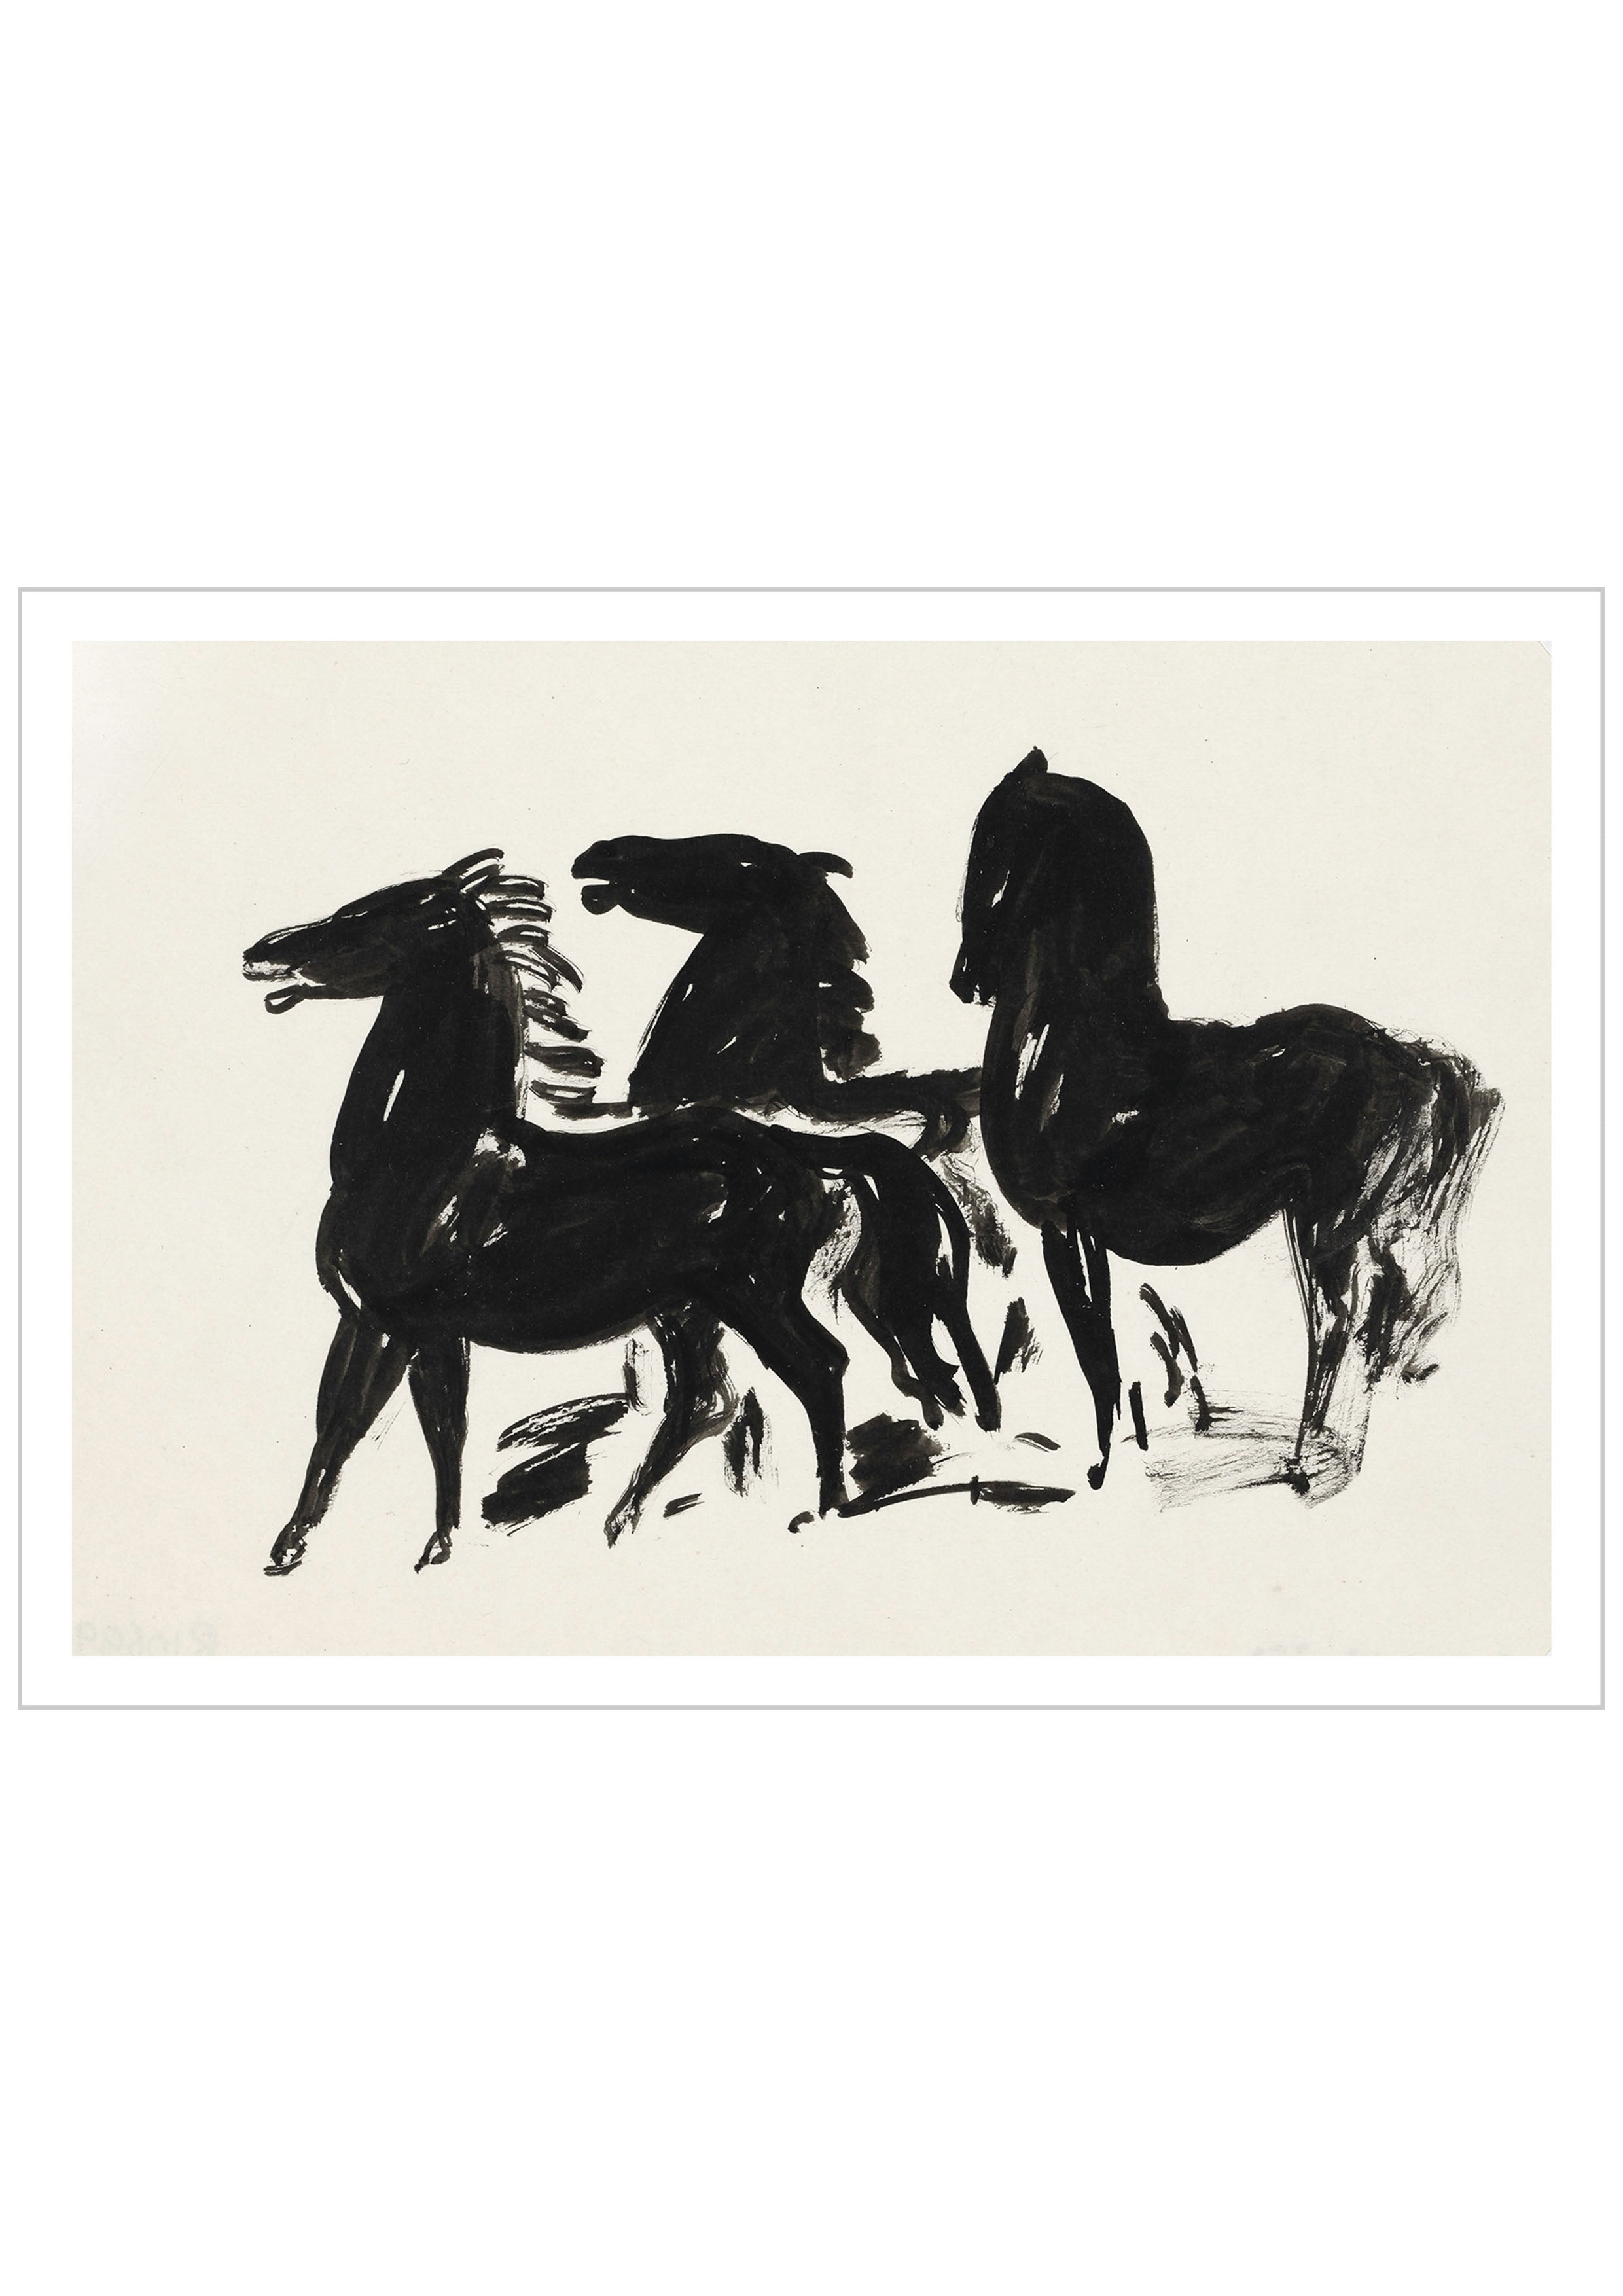 Three Horses Looking on the Left sketch by the Dutch artist Leo Gestel